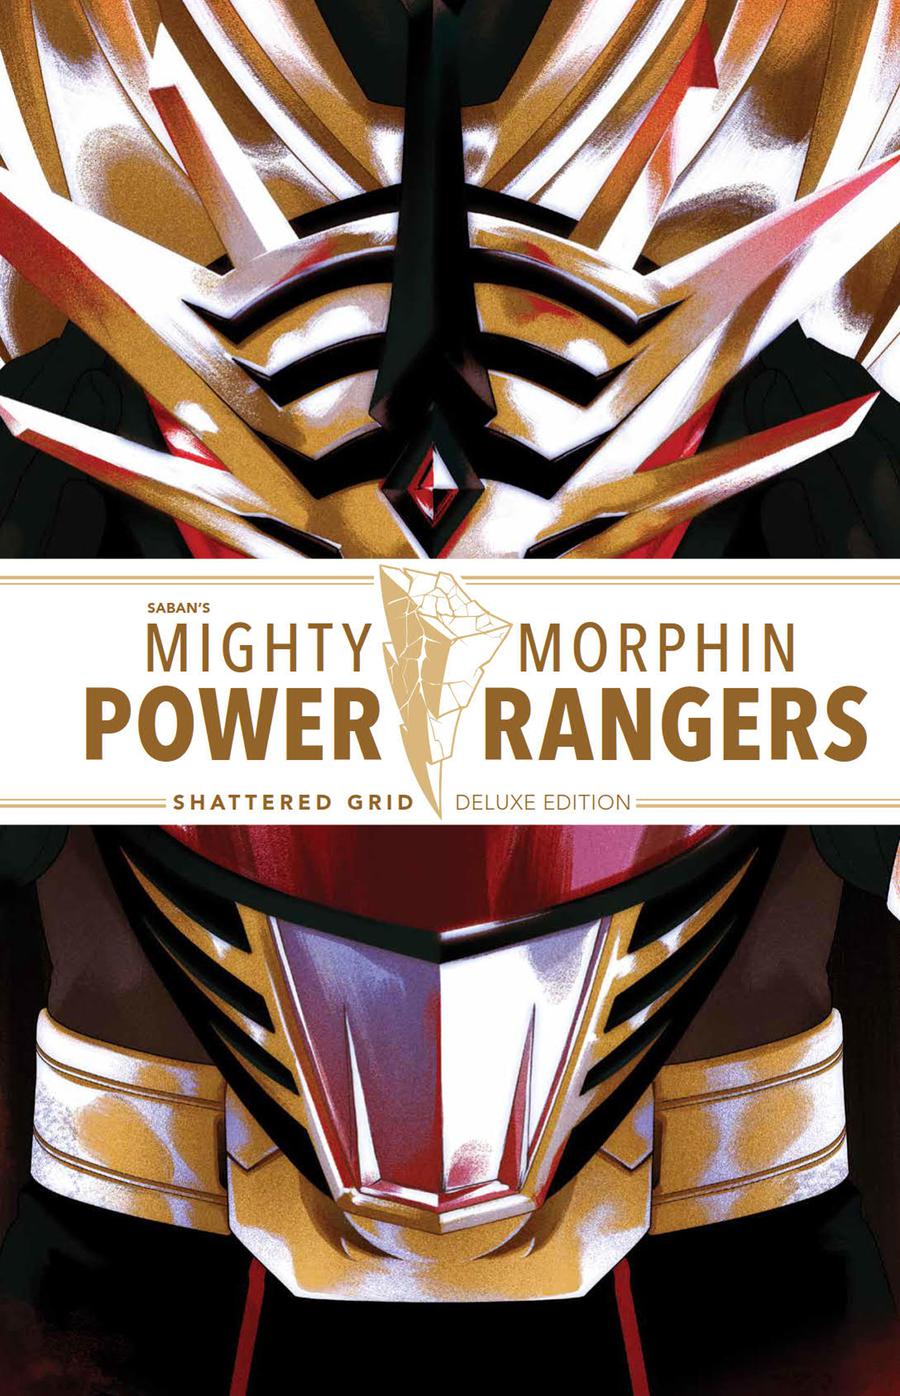 Mighty Morphin Power Rangers Shattered Grid Deluxe Edition HC